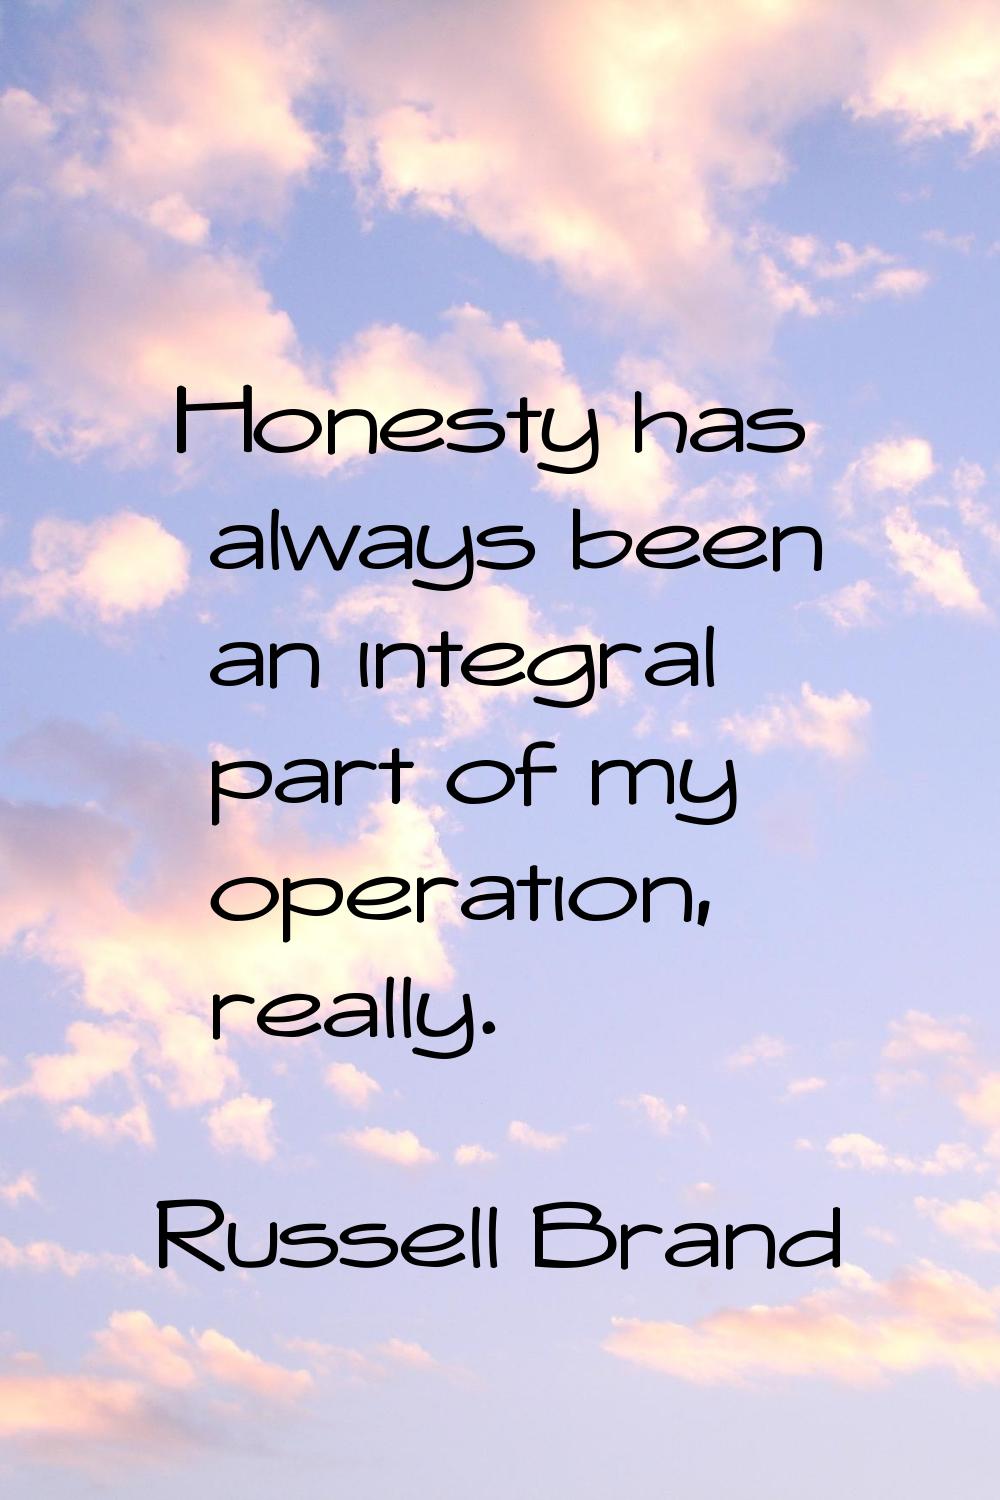 Honesty has always been an integral part of my operation, really.